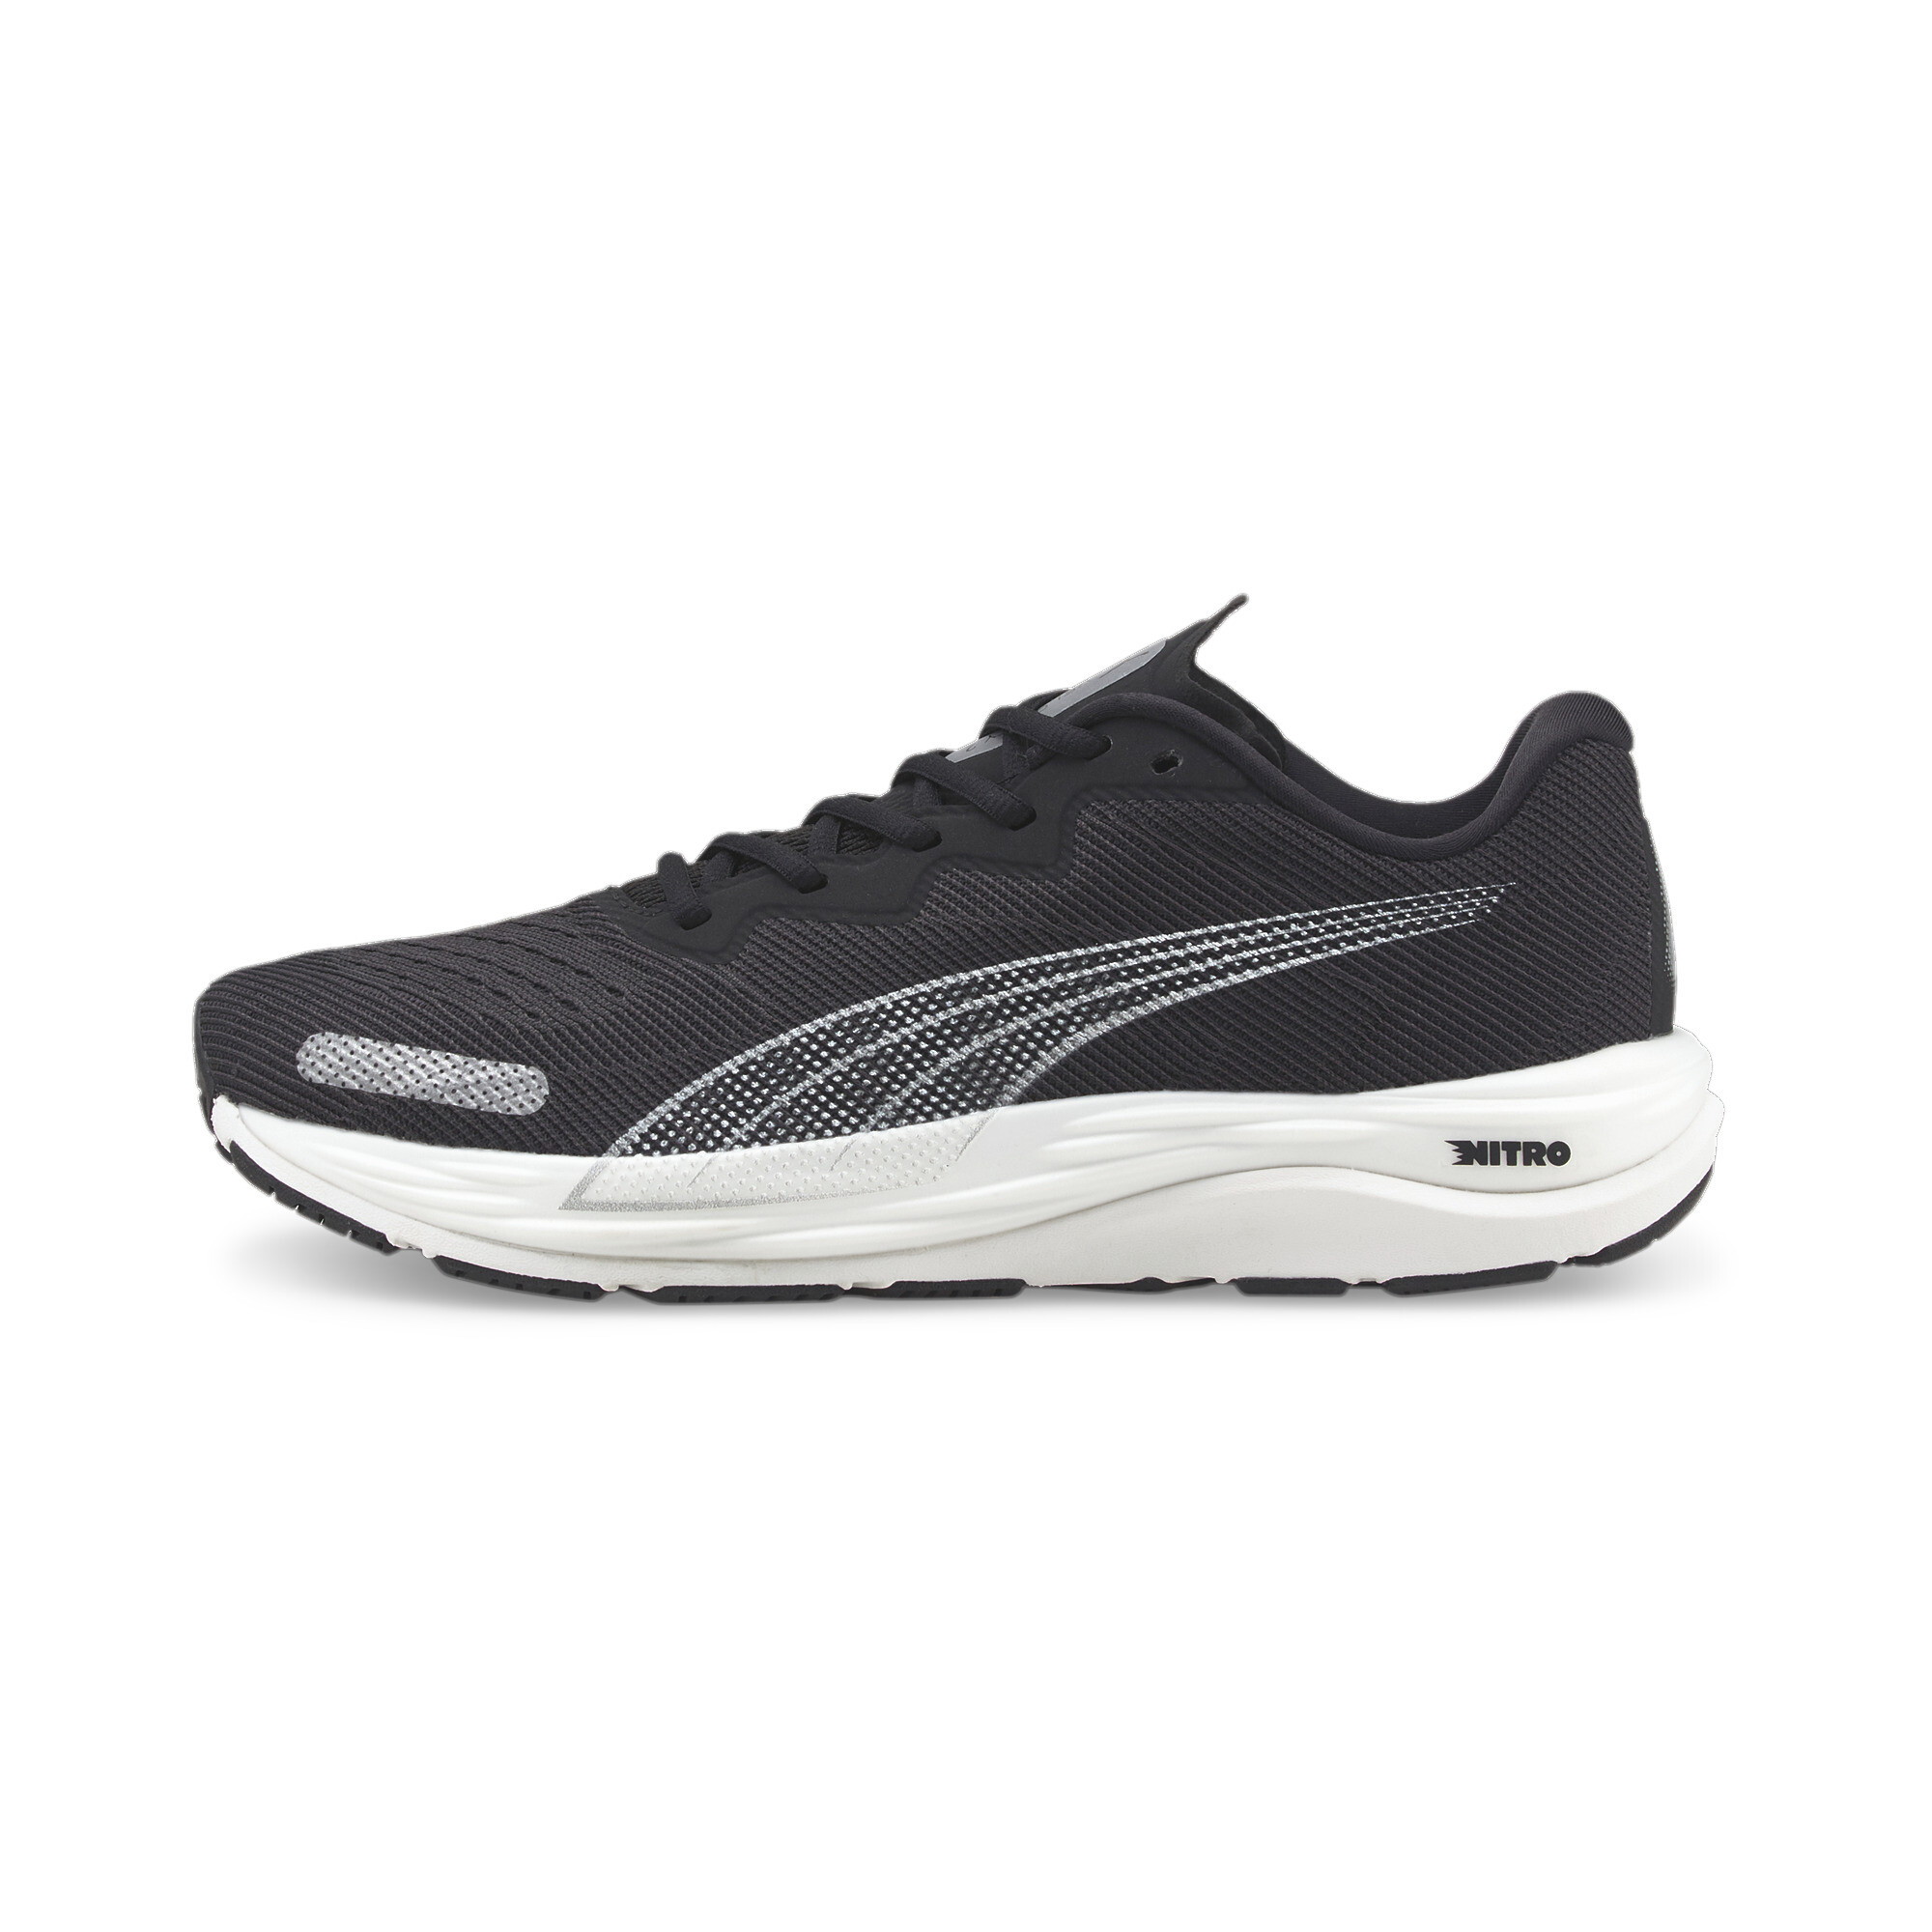 PUMA Mens Velocity Nitro 2 Running Shoes Trainers Lace Up Low Top | eBay